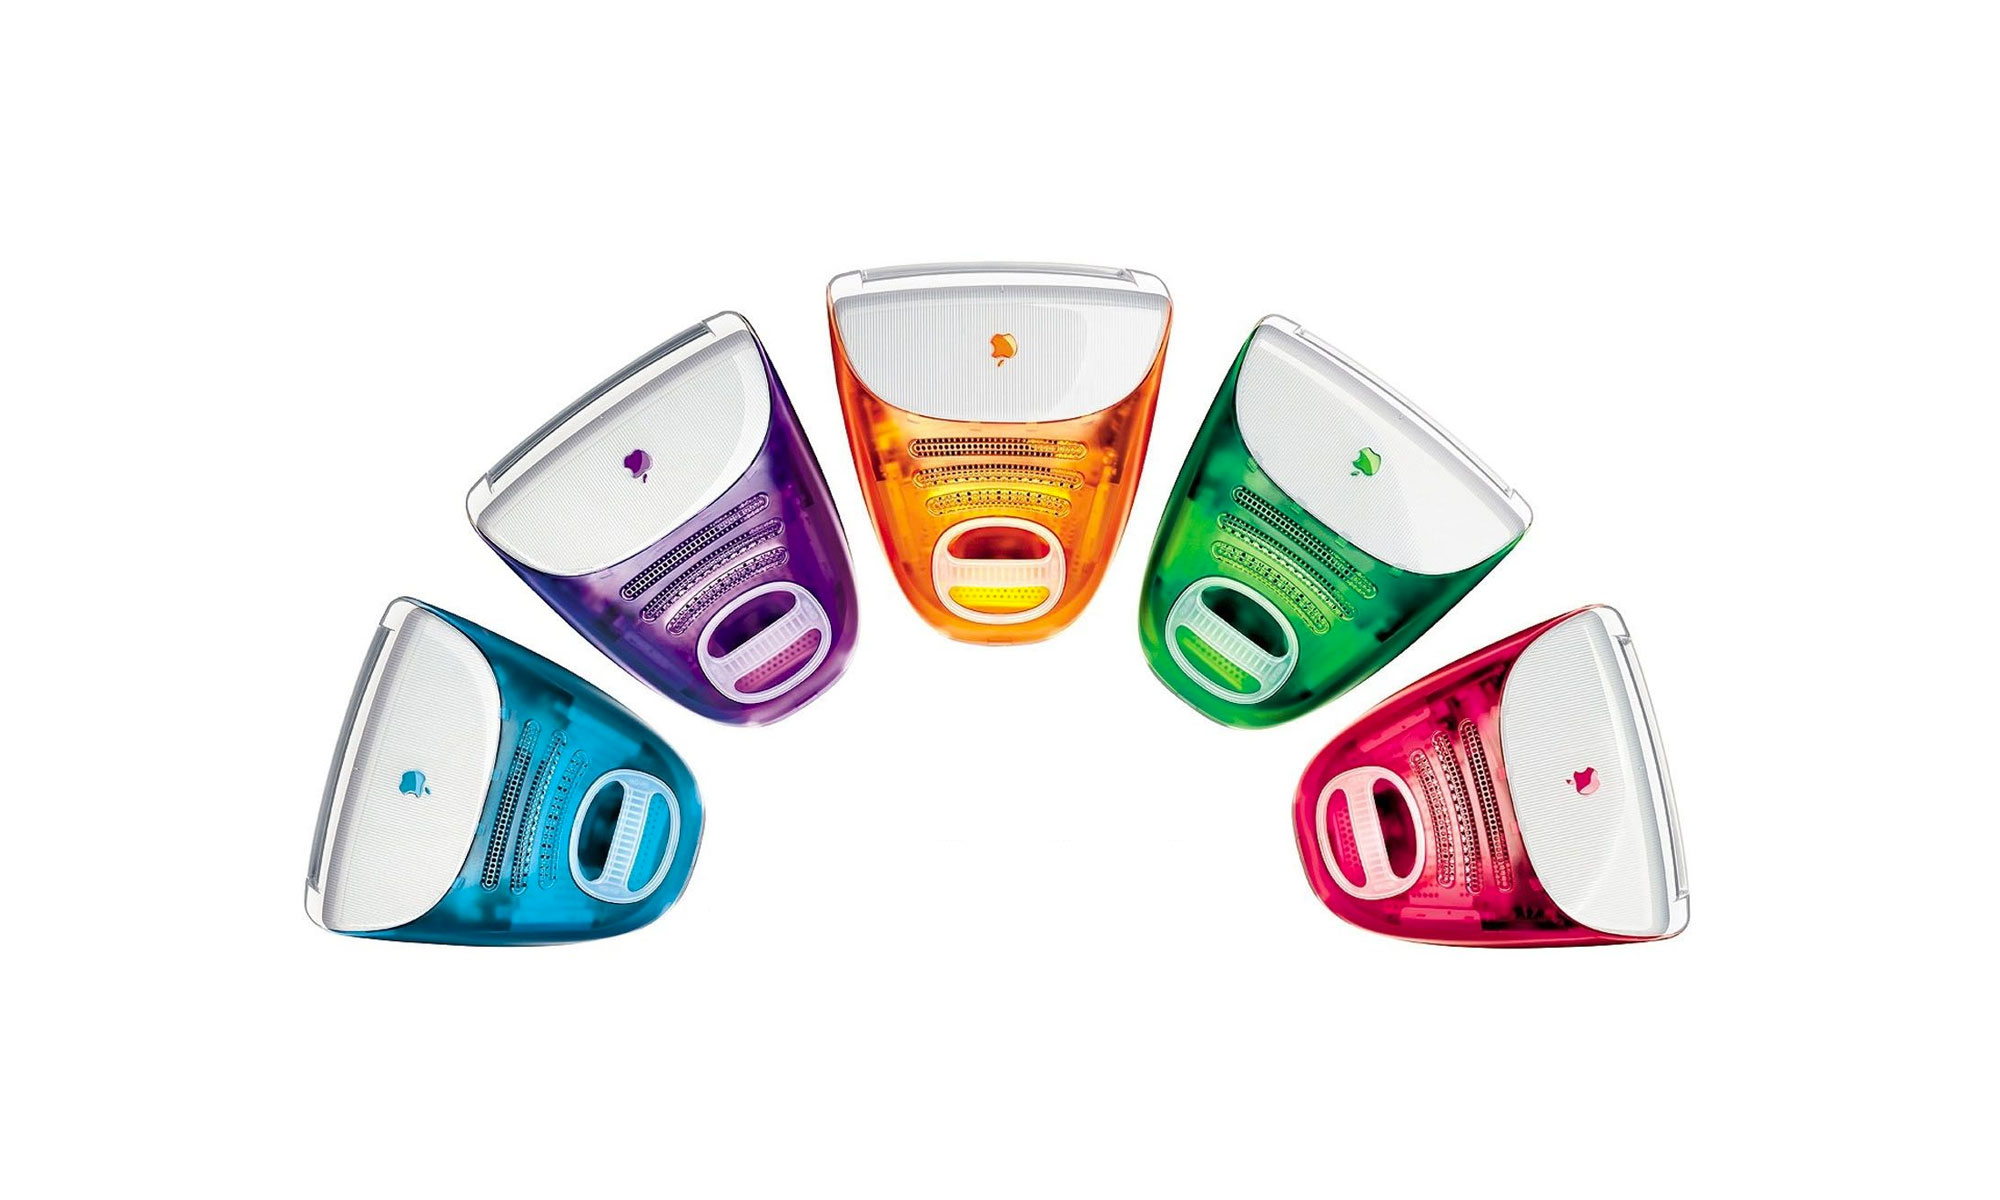 The iMac G3, in blueberry blue, grape purple, tangerine orange, lime green and strawberry red